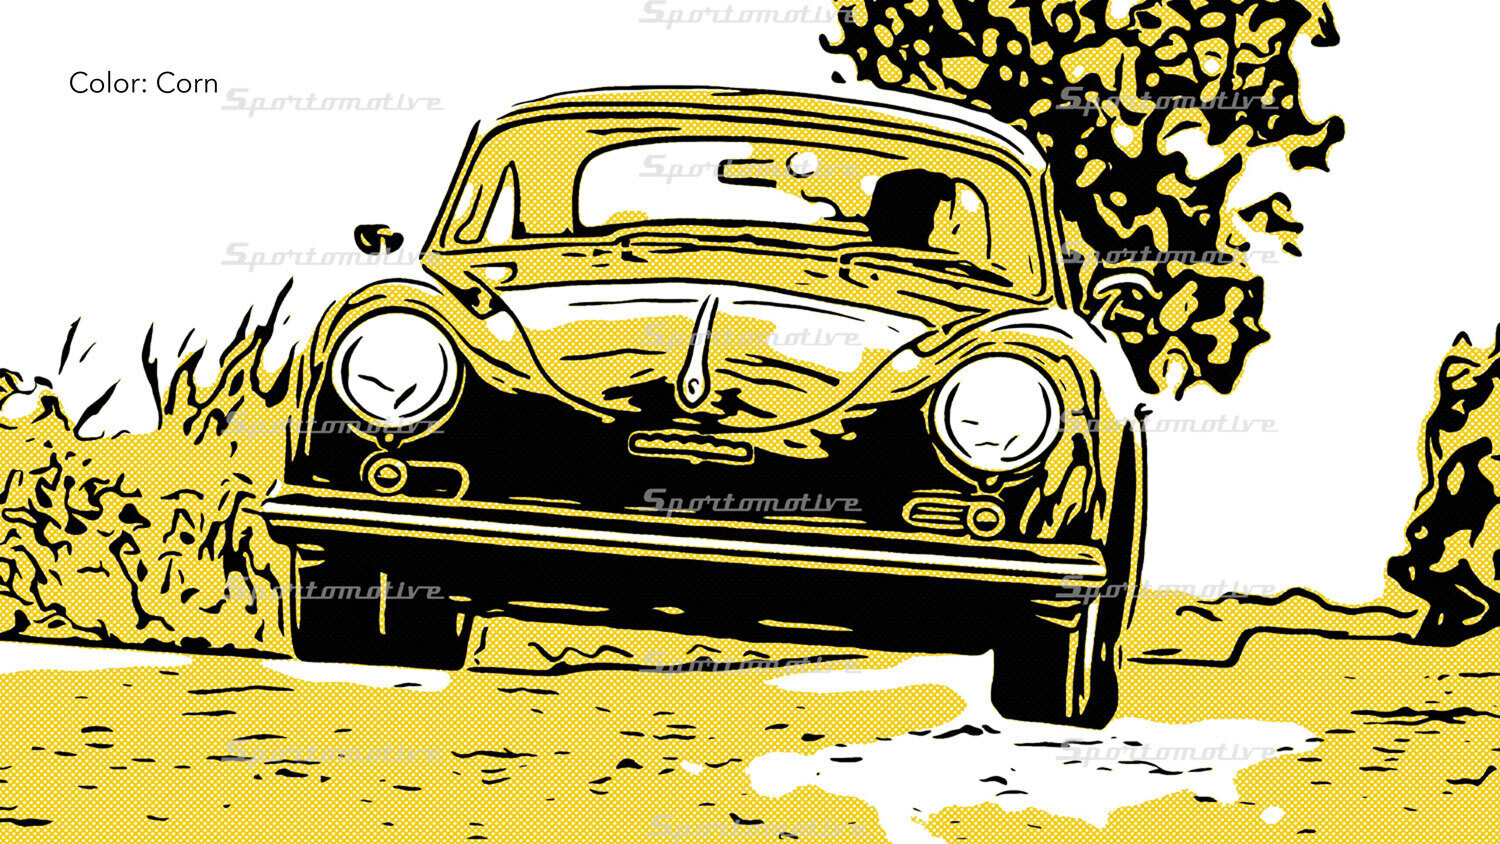 Hommage to the 'Ur-Porsche': the 356 - Color Series